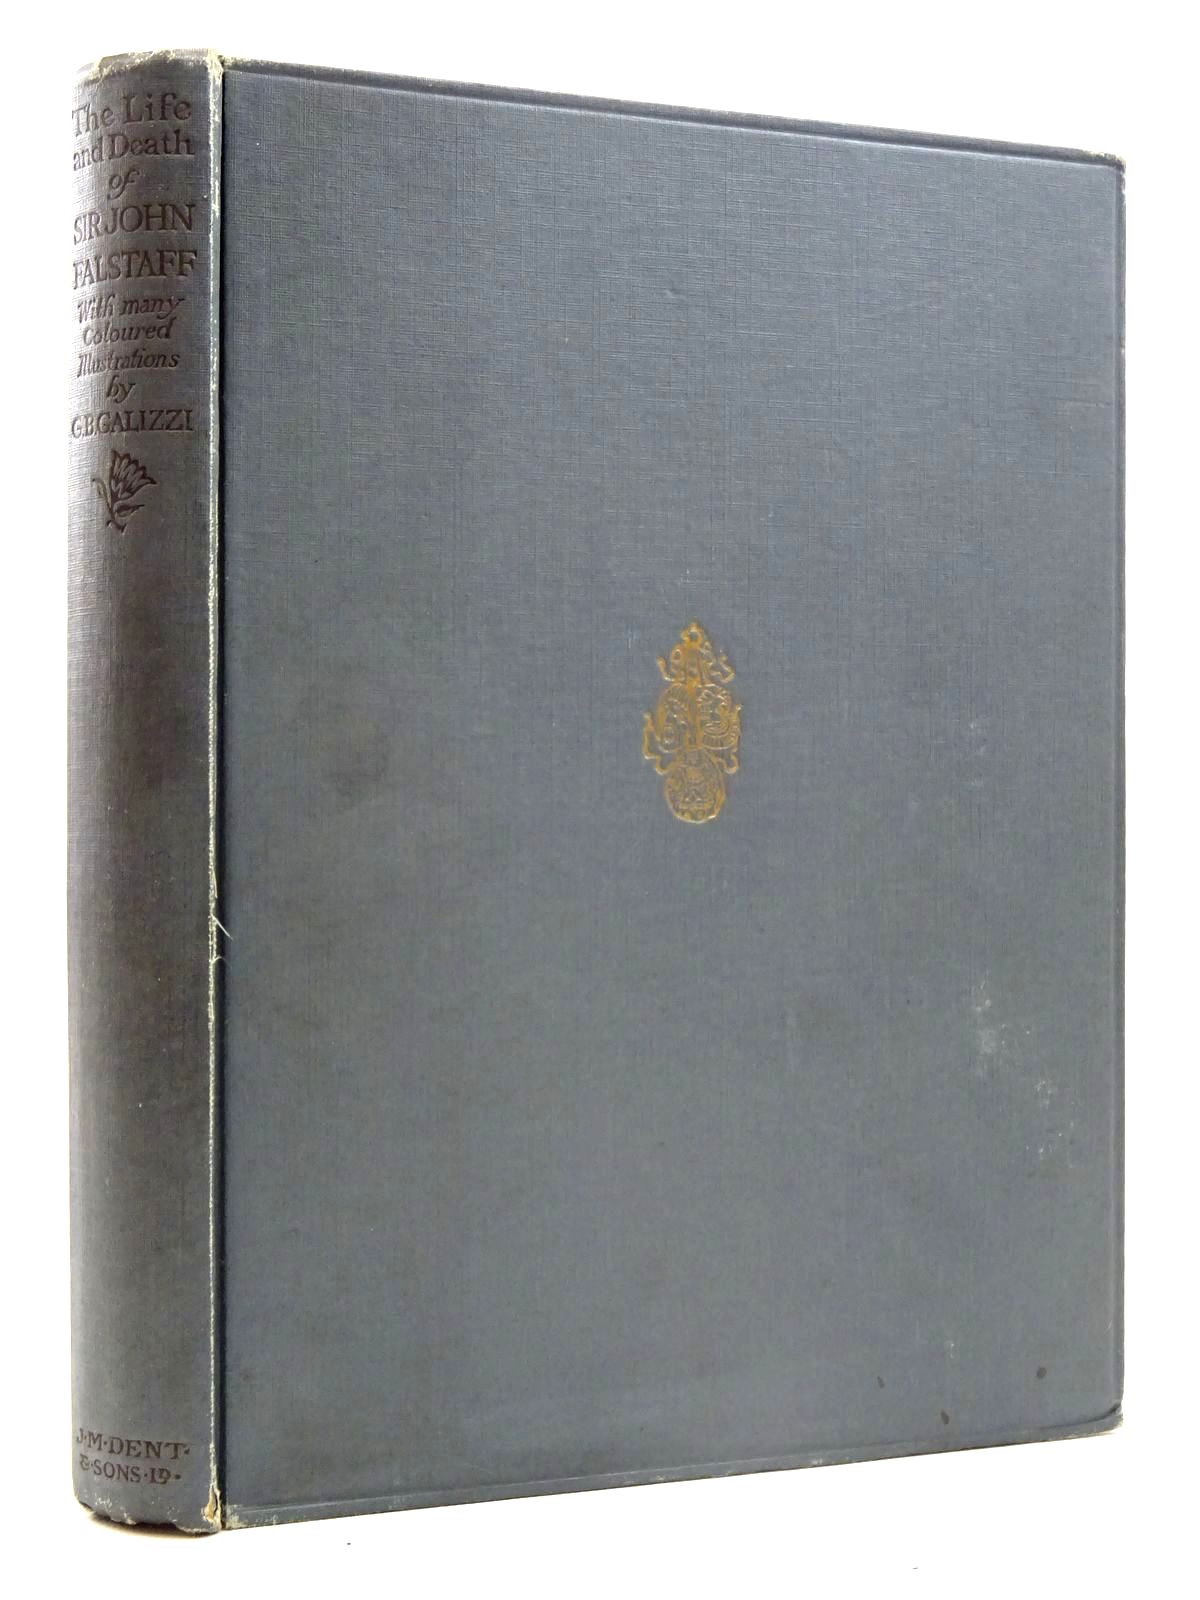 Photo of THE LIFE & DEATH OF SIR JOHN FALSTAFF written by Shakespeare, William Radford, George illustrated by Galizzi, G.B. published by J.M. Dent &amp; Sons Ltd. (STOCK CODE: 1816228)  for sale by Stella & Rose's Books